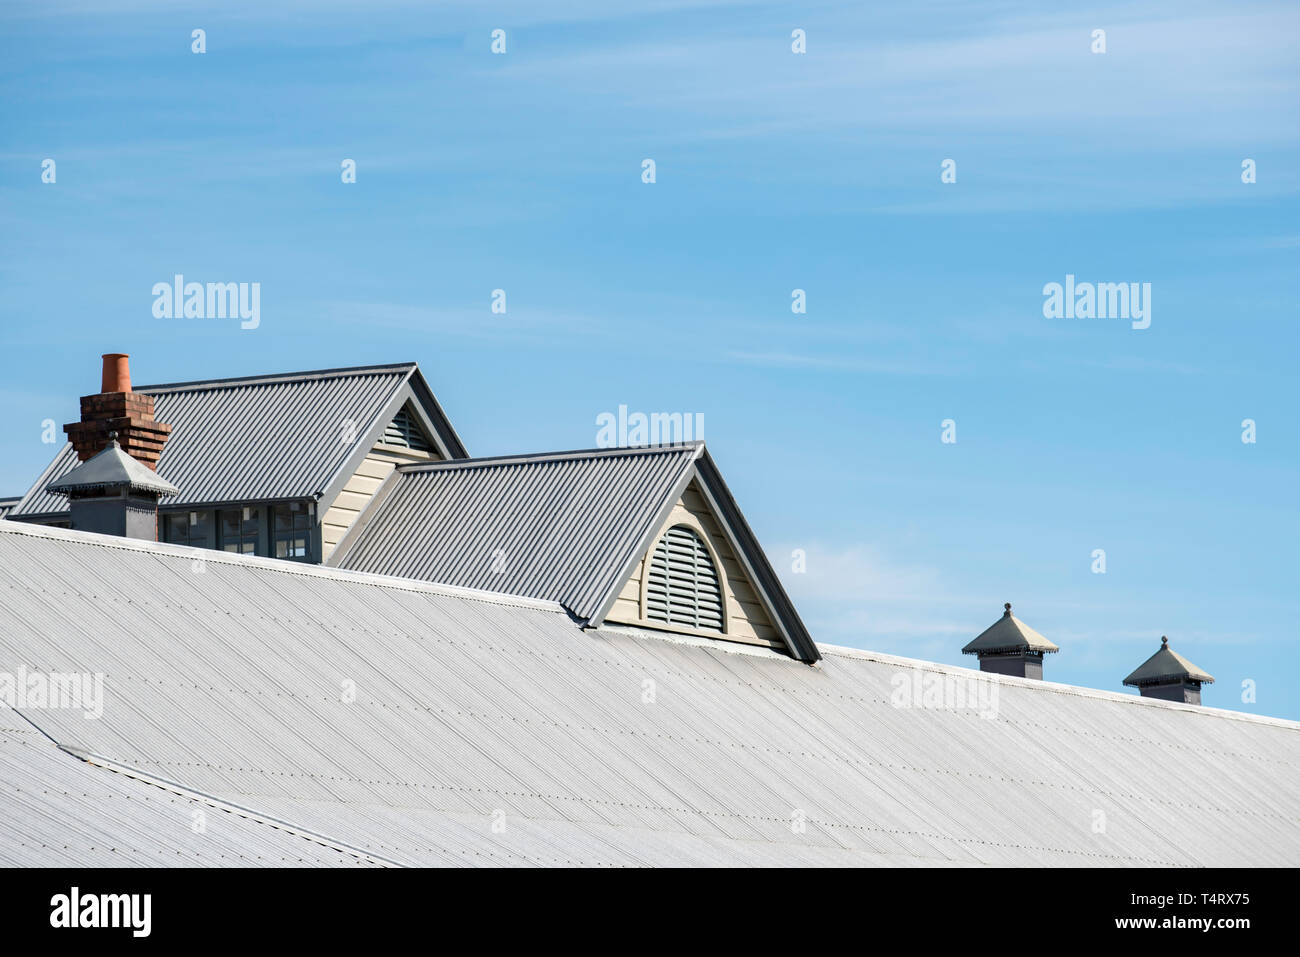 Galvanized corrugated iron roofing at the Parramatta South Campus of Western Sydney University (WSU), New South Wales, Australia Stock Photo